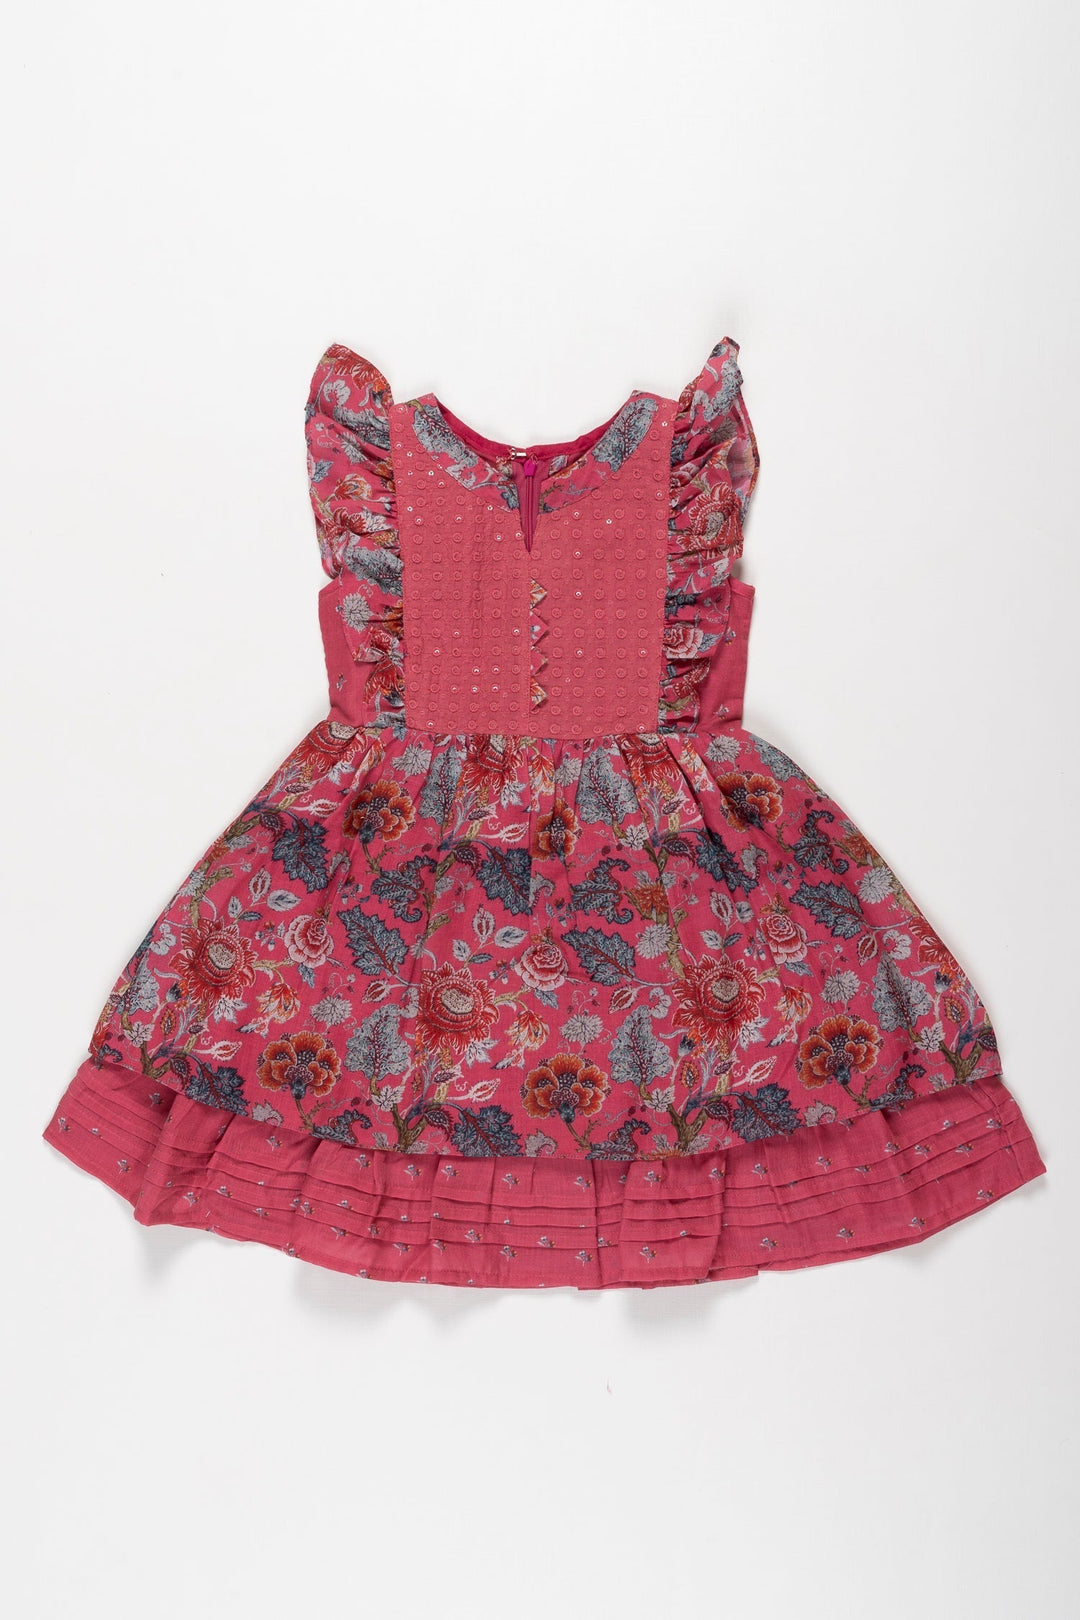 The Nesavu Girls Cotton Frock Enchanted Garden: Girls Floral Textured Cotton Frock with Flutter Sleeves Nesavu 22 (4Y) / Pink / Cotton GFC1293B-22 Burgundy Floral Girls Cotton Frock | Perfect for Every Occasion | The Nesavu